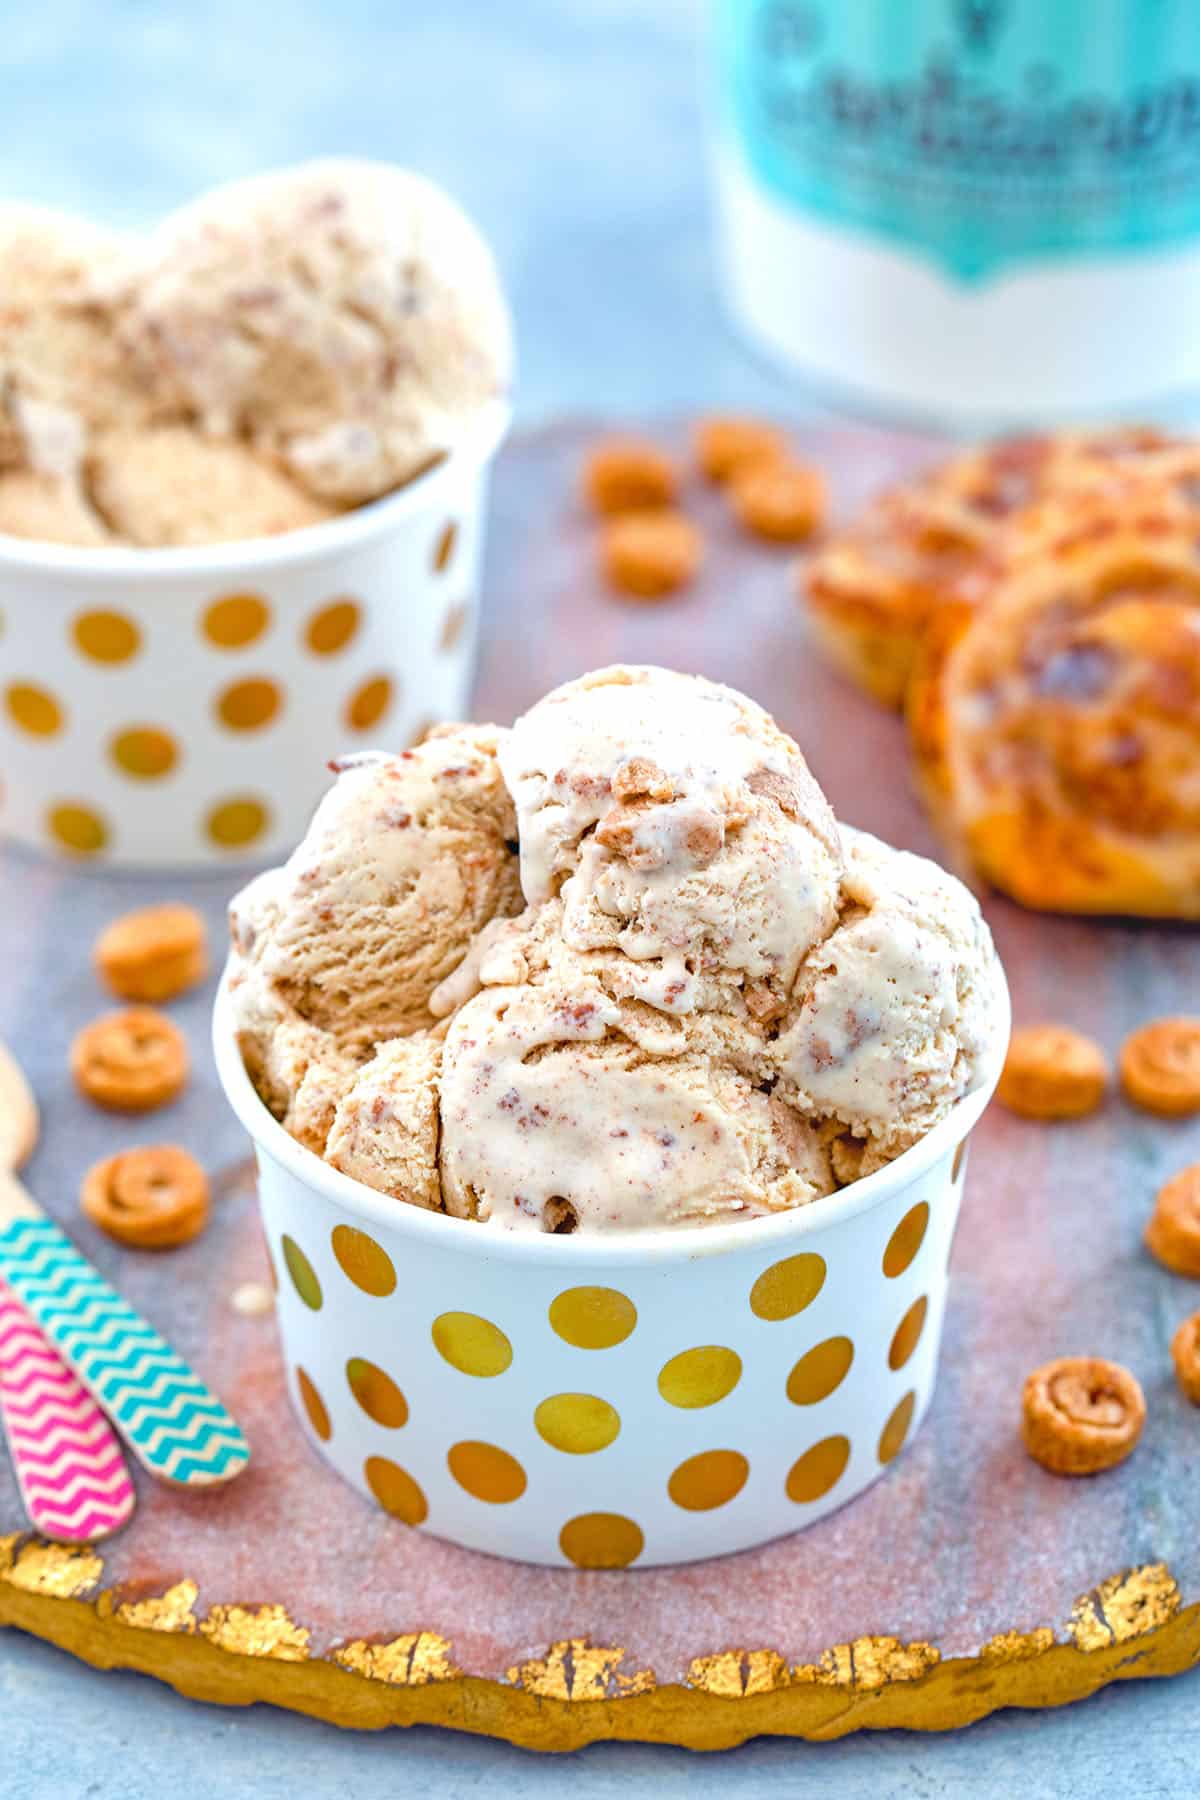 View of a small cup of cinnamon roll ice cream with mini cinnamon rolls, large cinnamon rolls, second cup of ice cream, and ice cream quart container in background with recipe title at top.